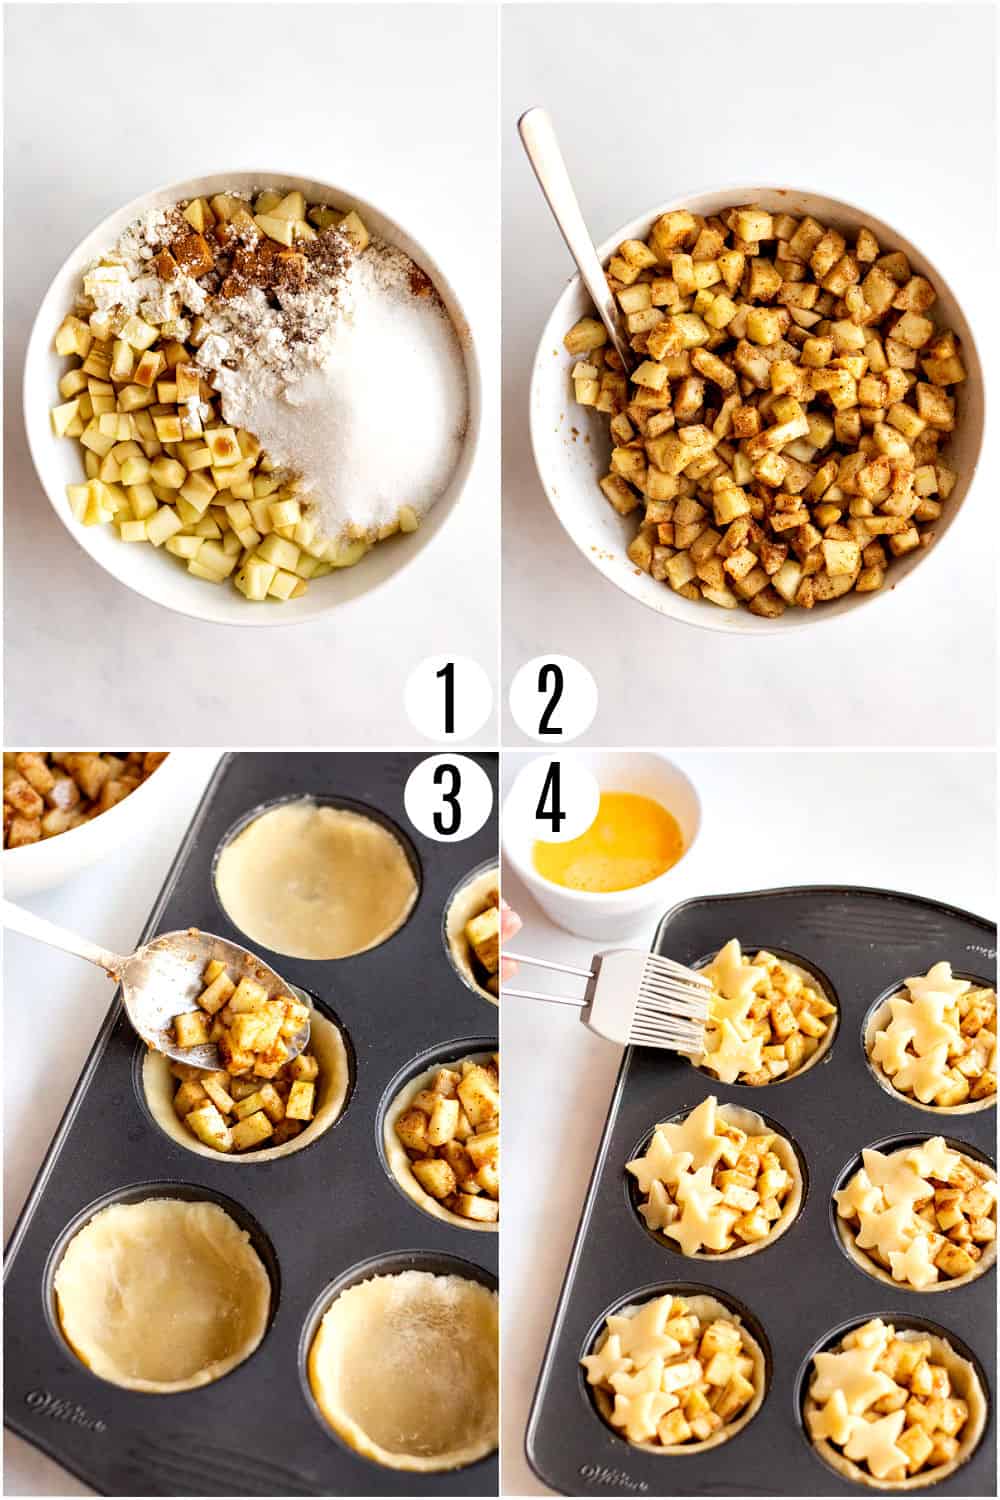 Step by step photos showing how to make mini apple pies.